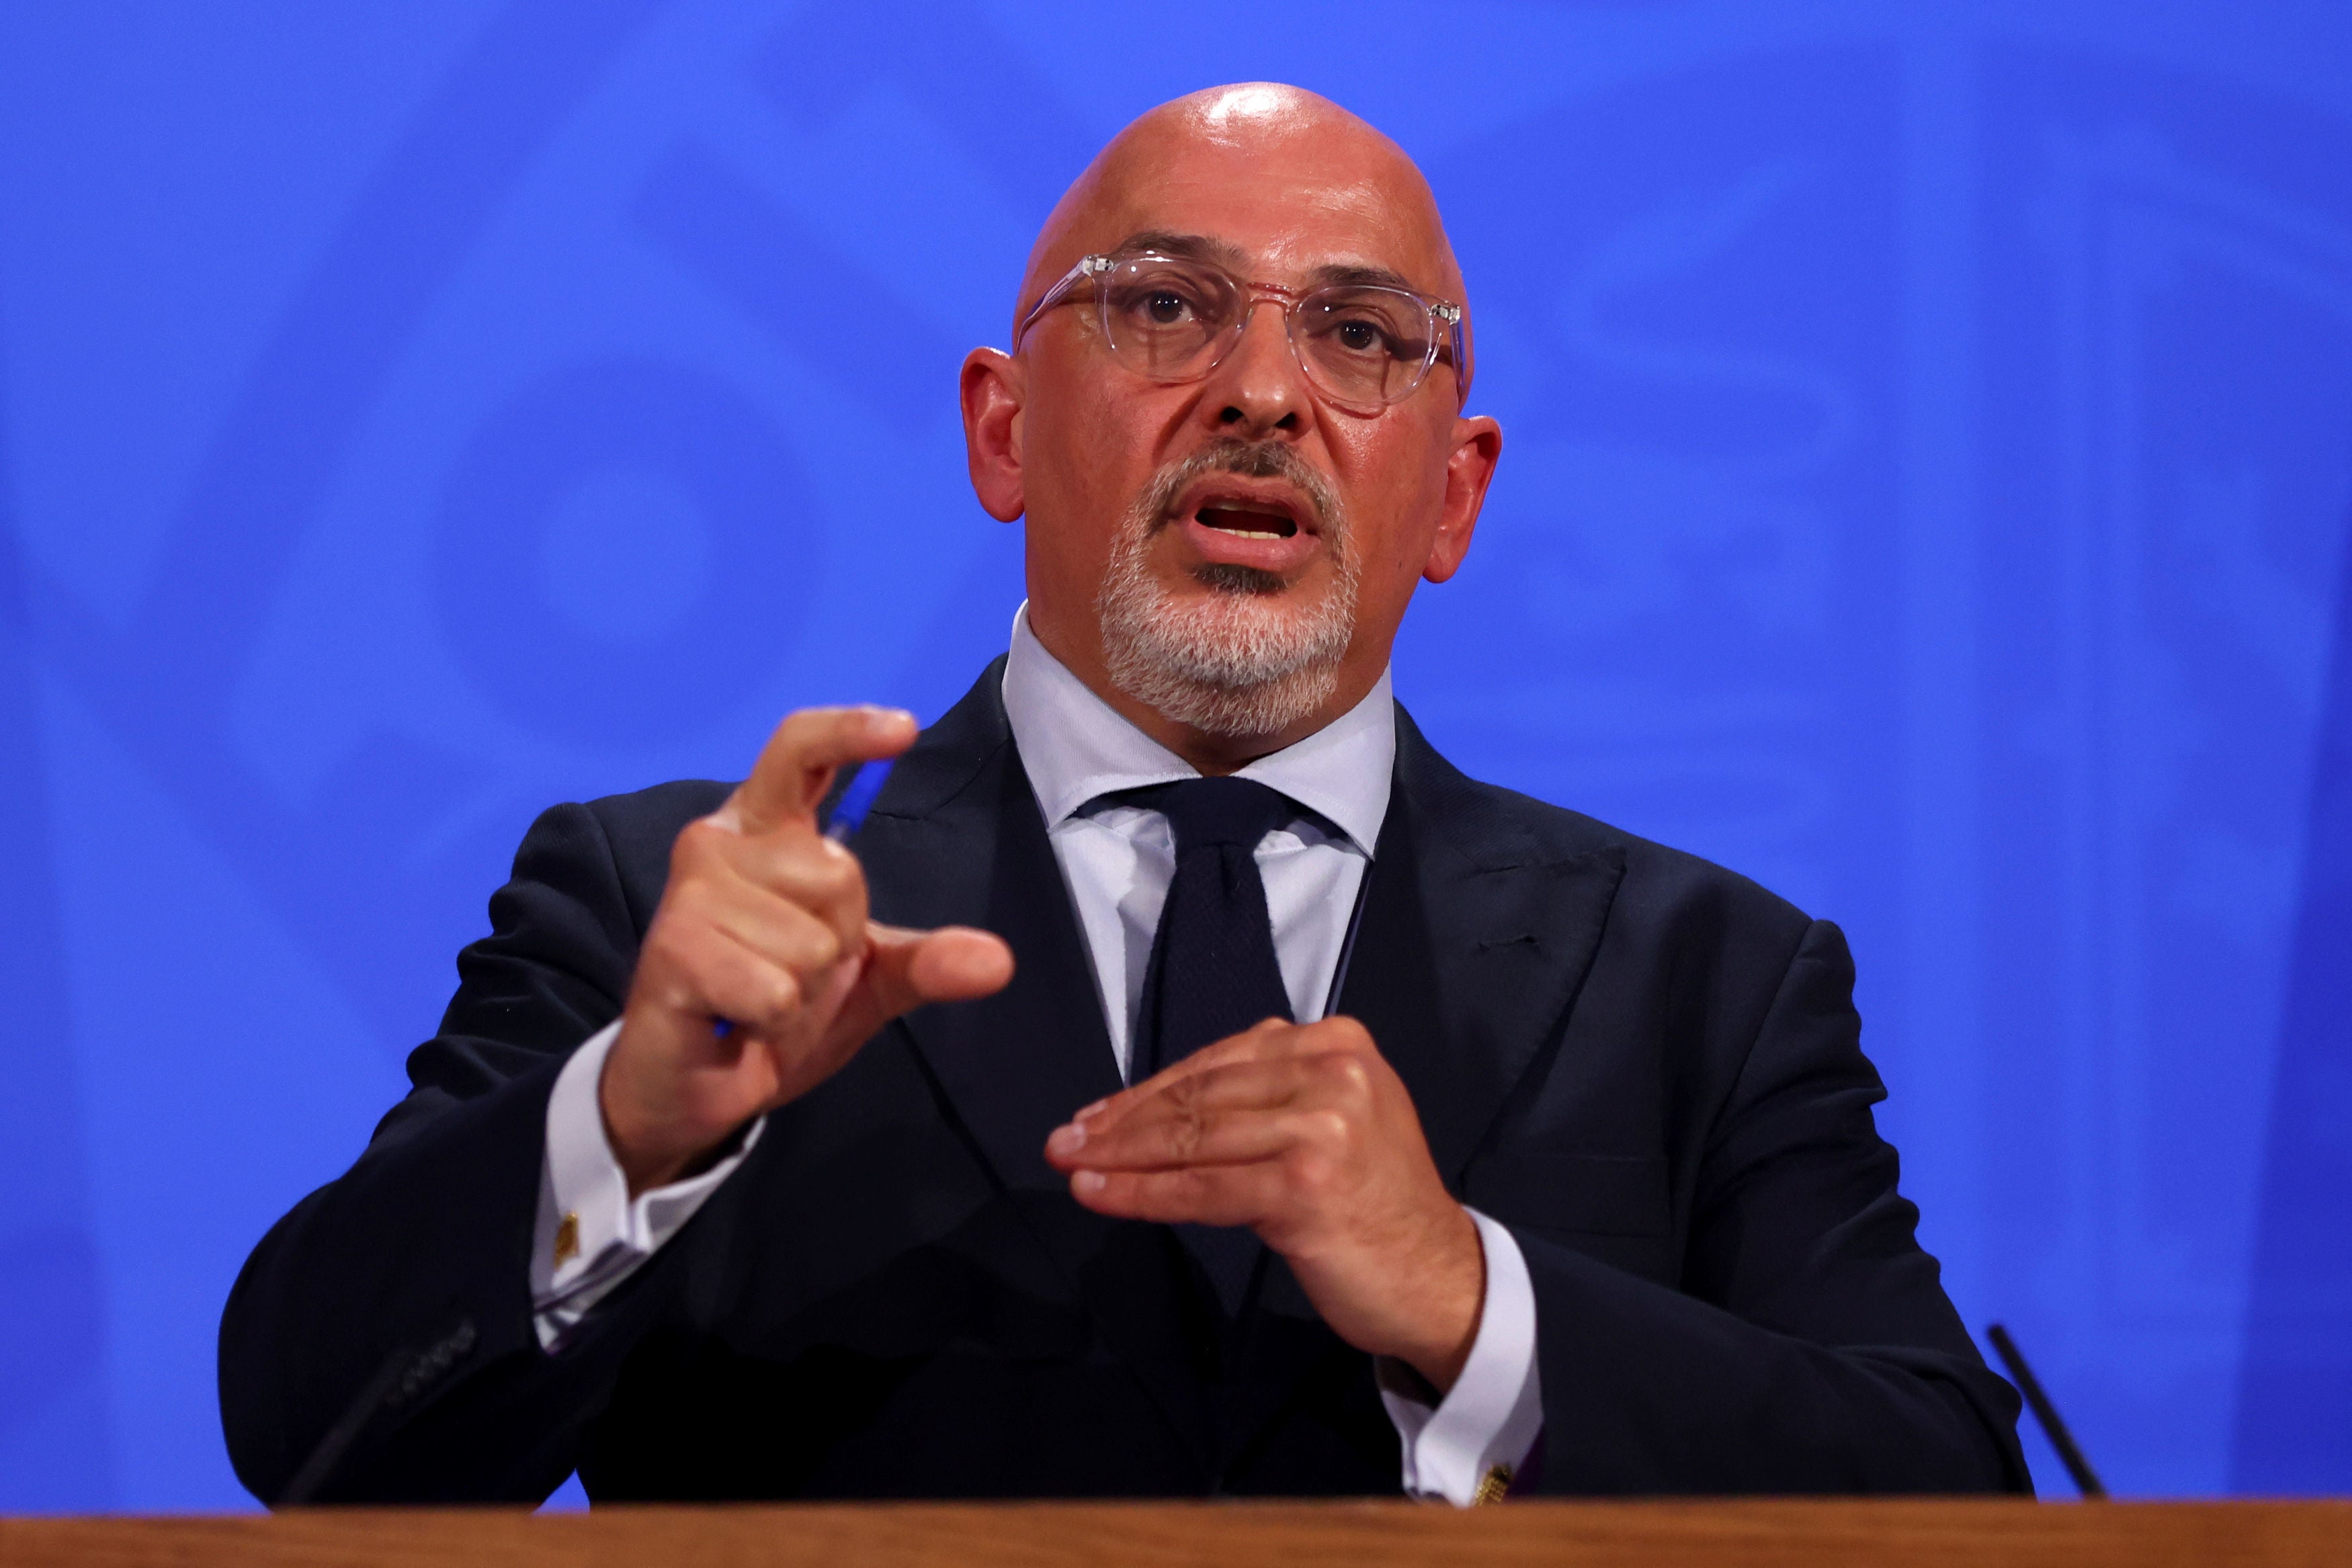 The government is yet to decide whether to vaccinate healthy 12-15 year olds against coronavirus, says Nadhim Zahawi the vaccines minister